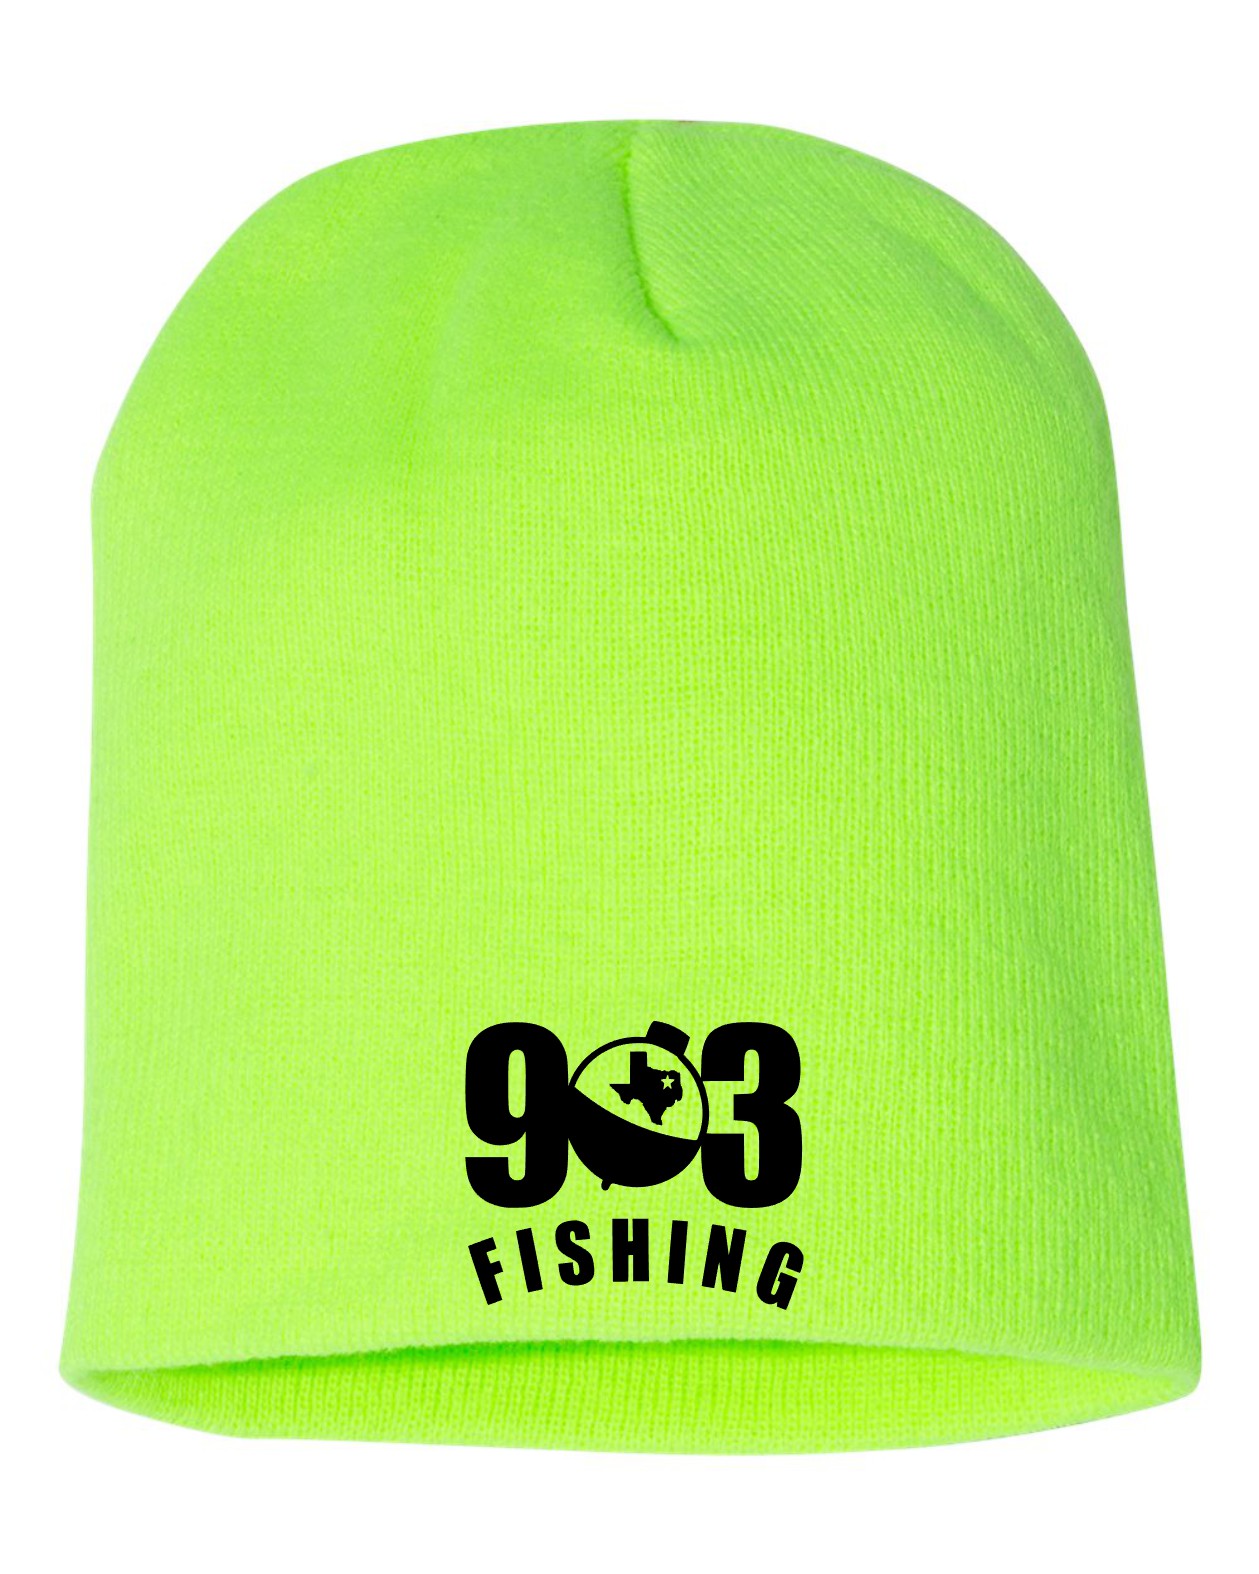 903 Fishing Embroidered Beanie